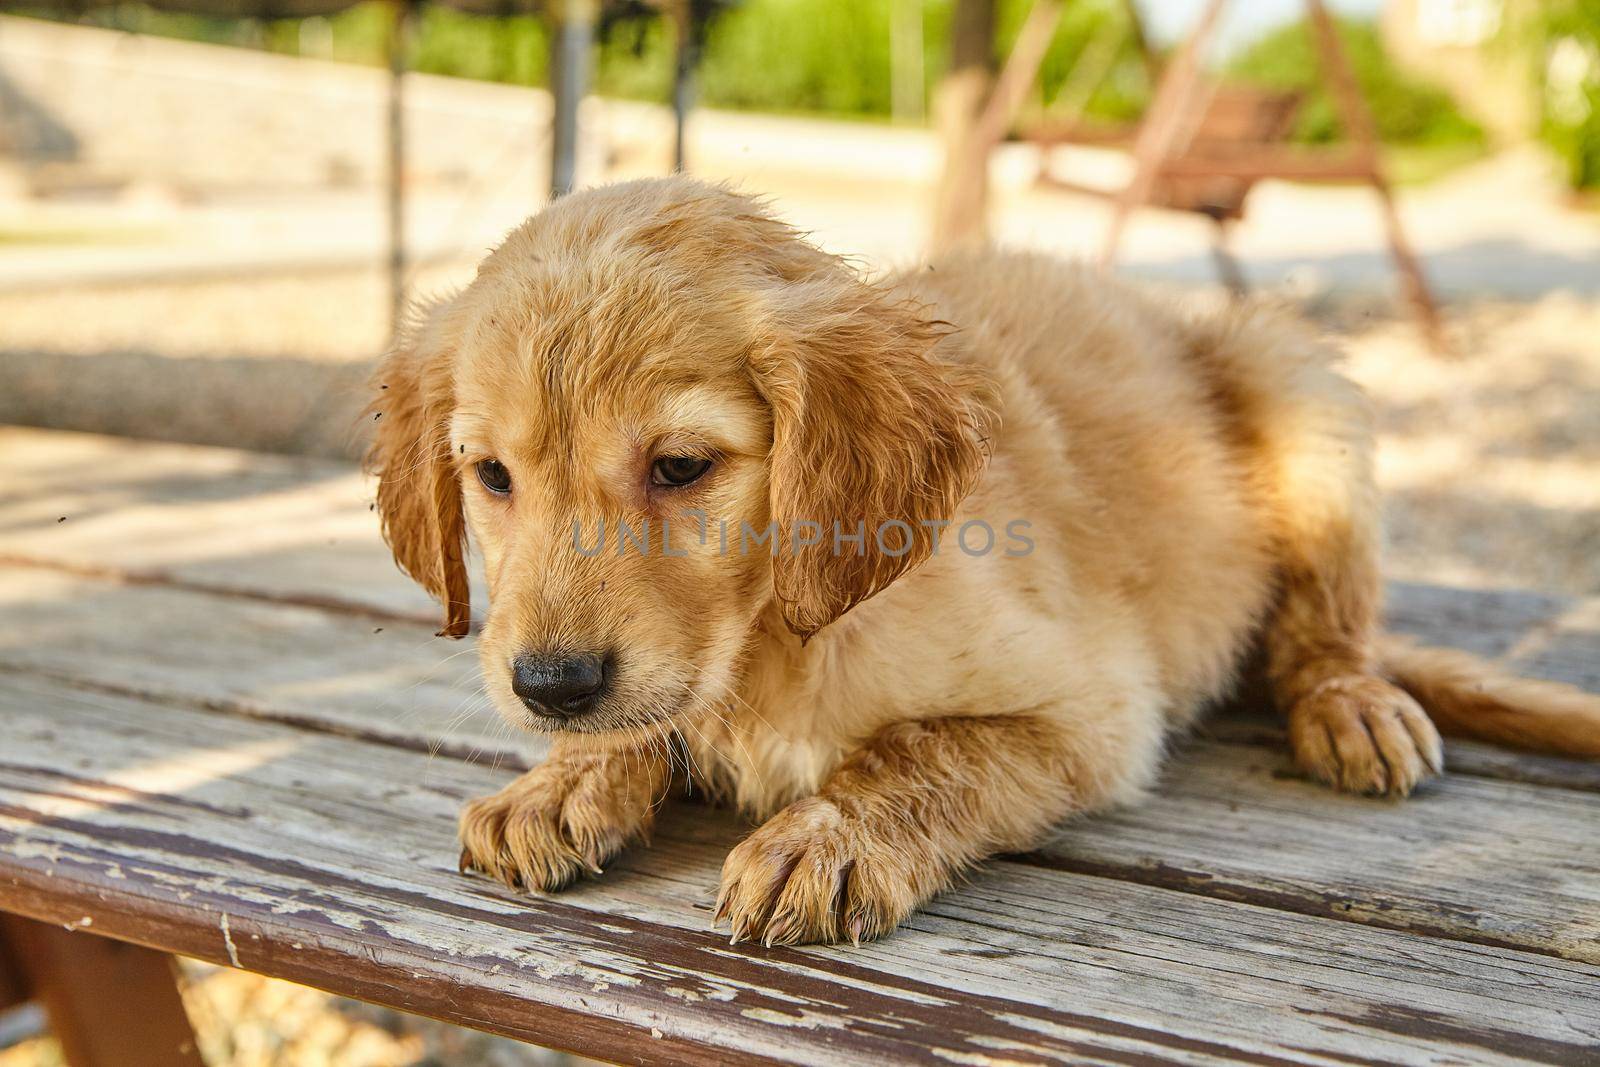 Image of Tired and wet Labradoodle puppy resting on wood boards